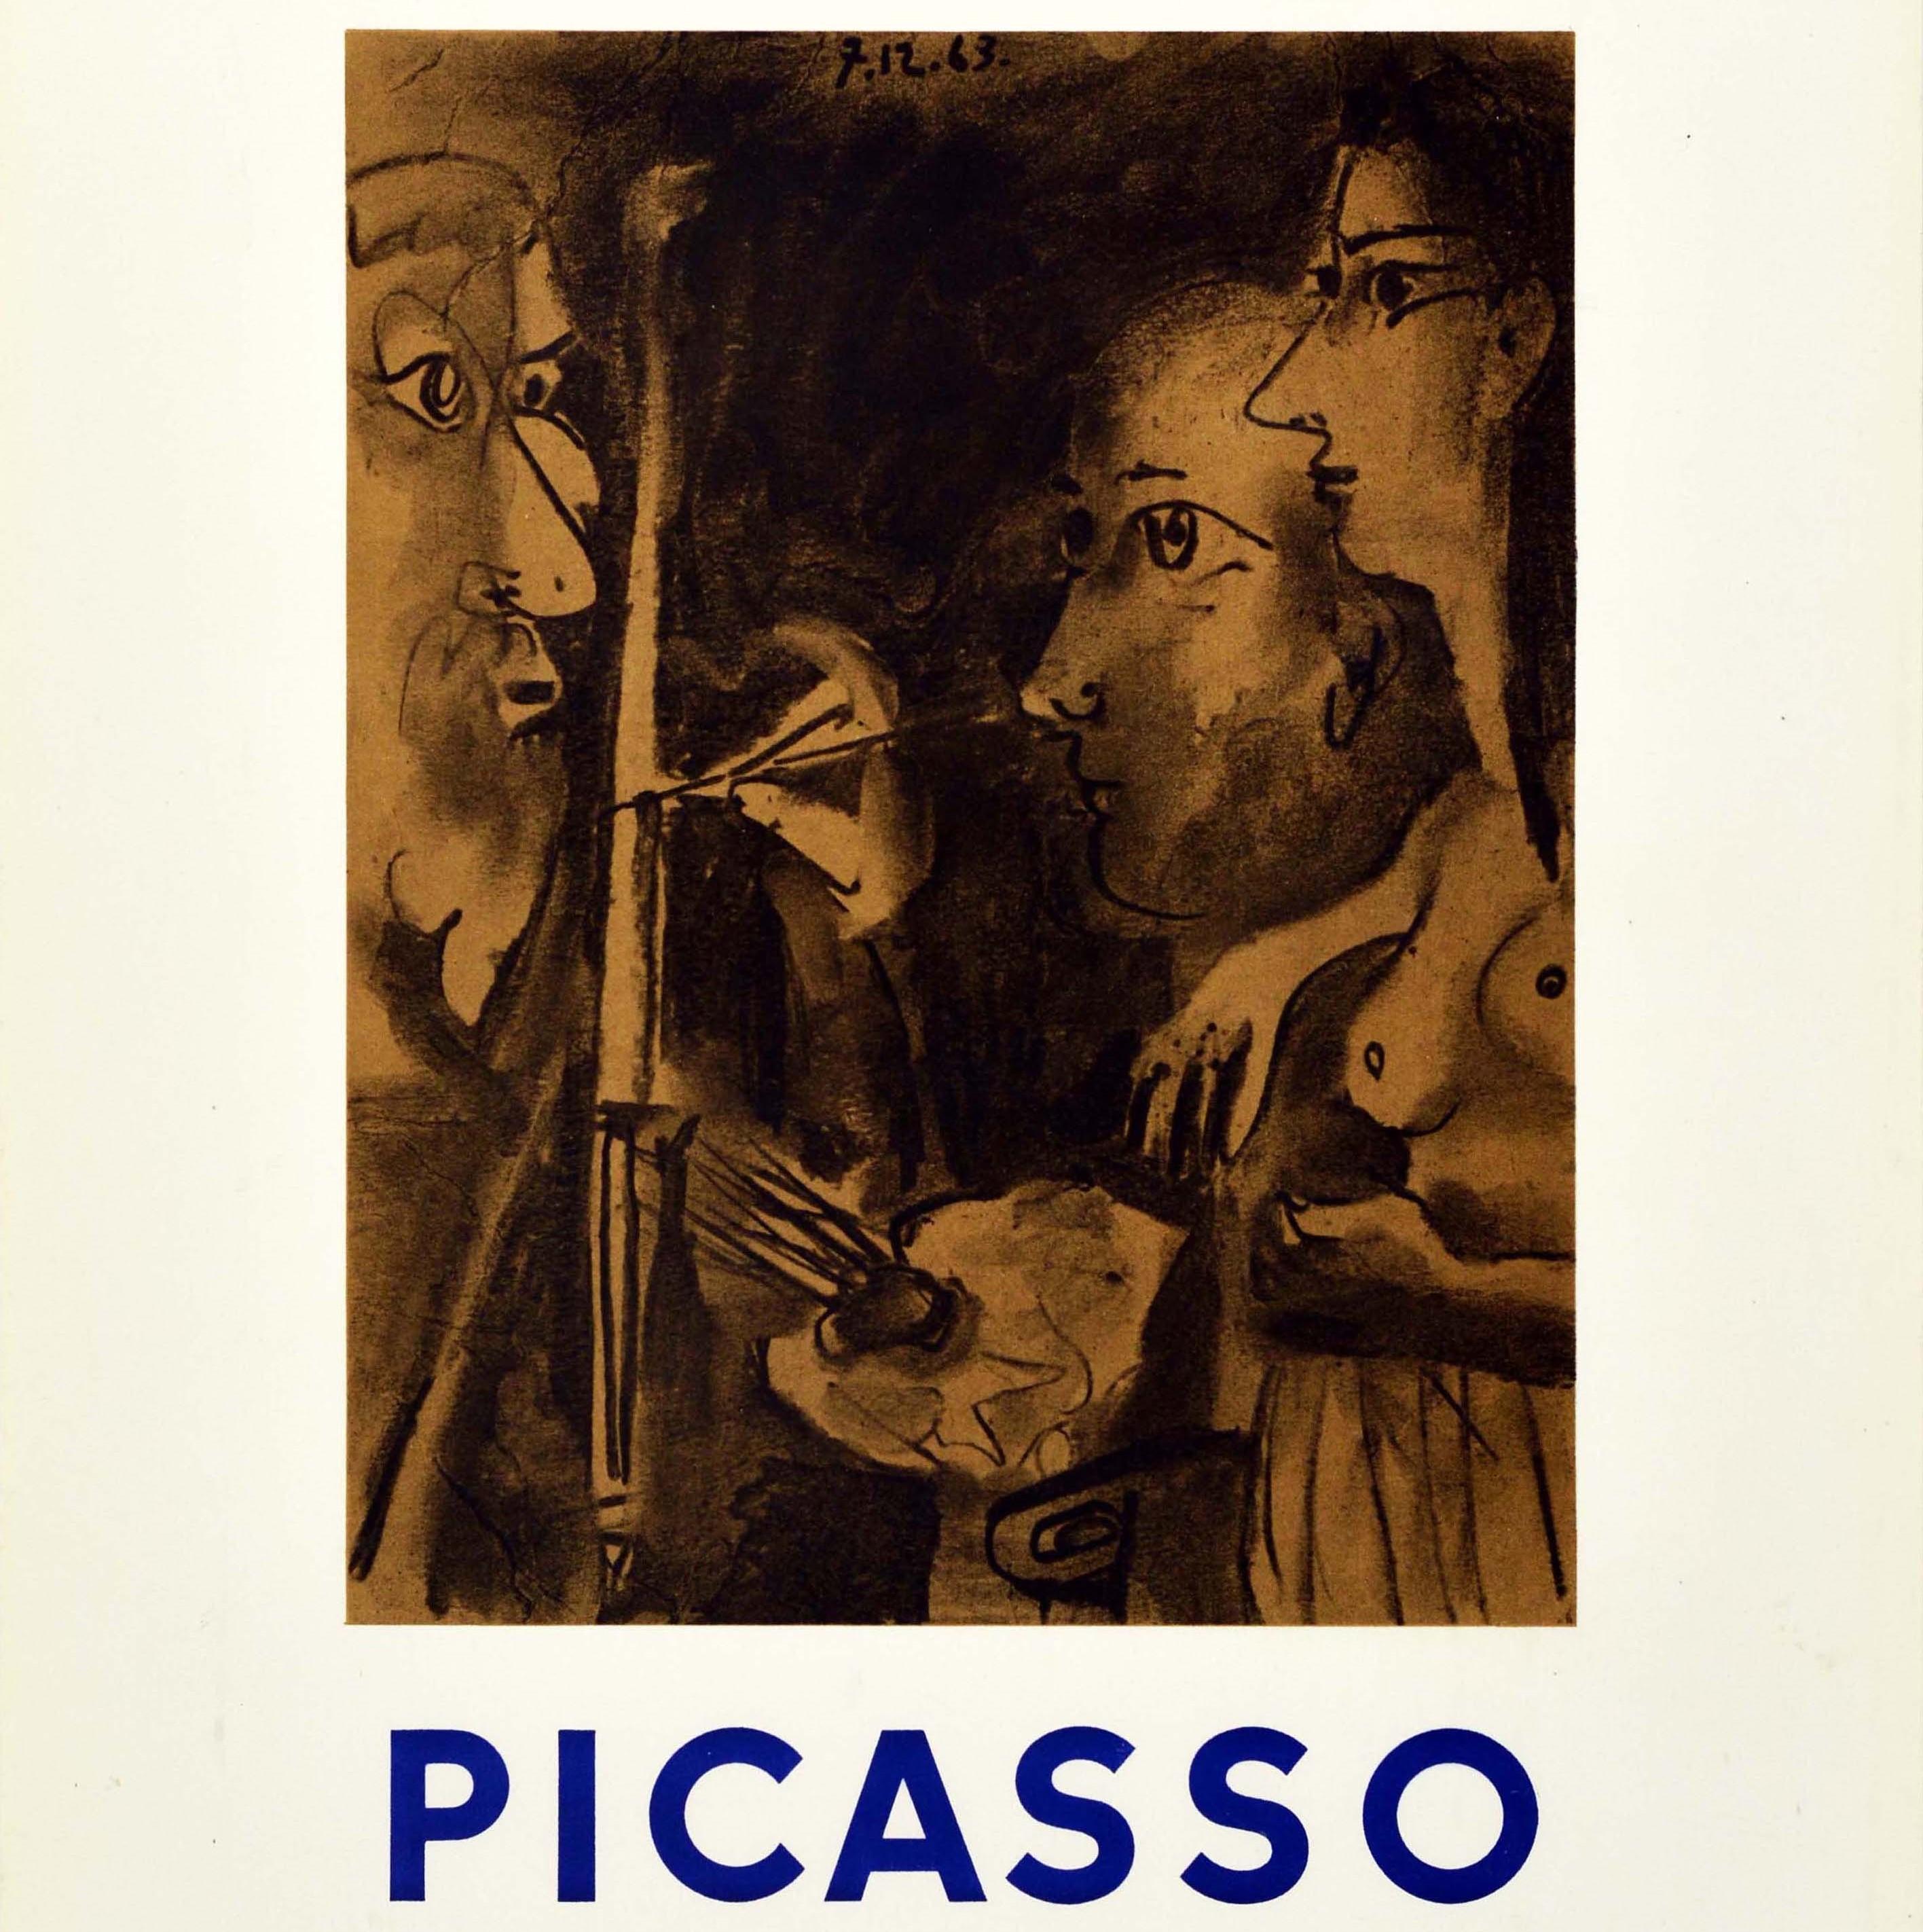 Original Vintage Paris Art Exhibition Poster Picasso The Painter And His Model - Abstract Print by (after) Pablo Picasso